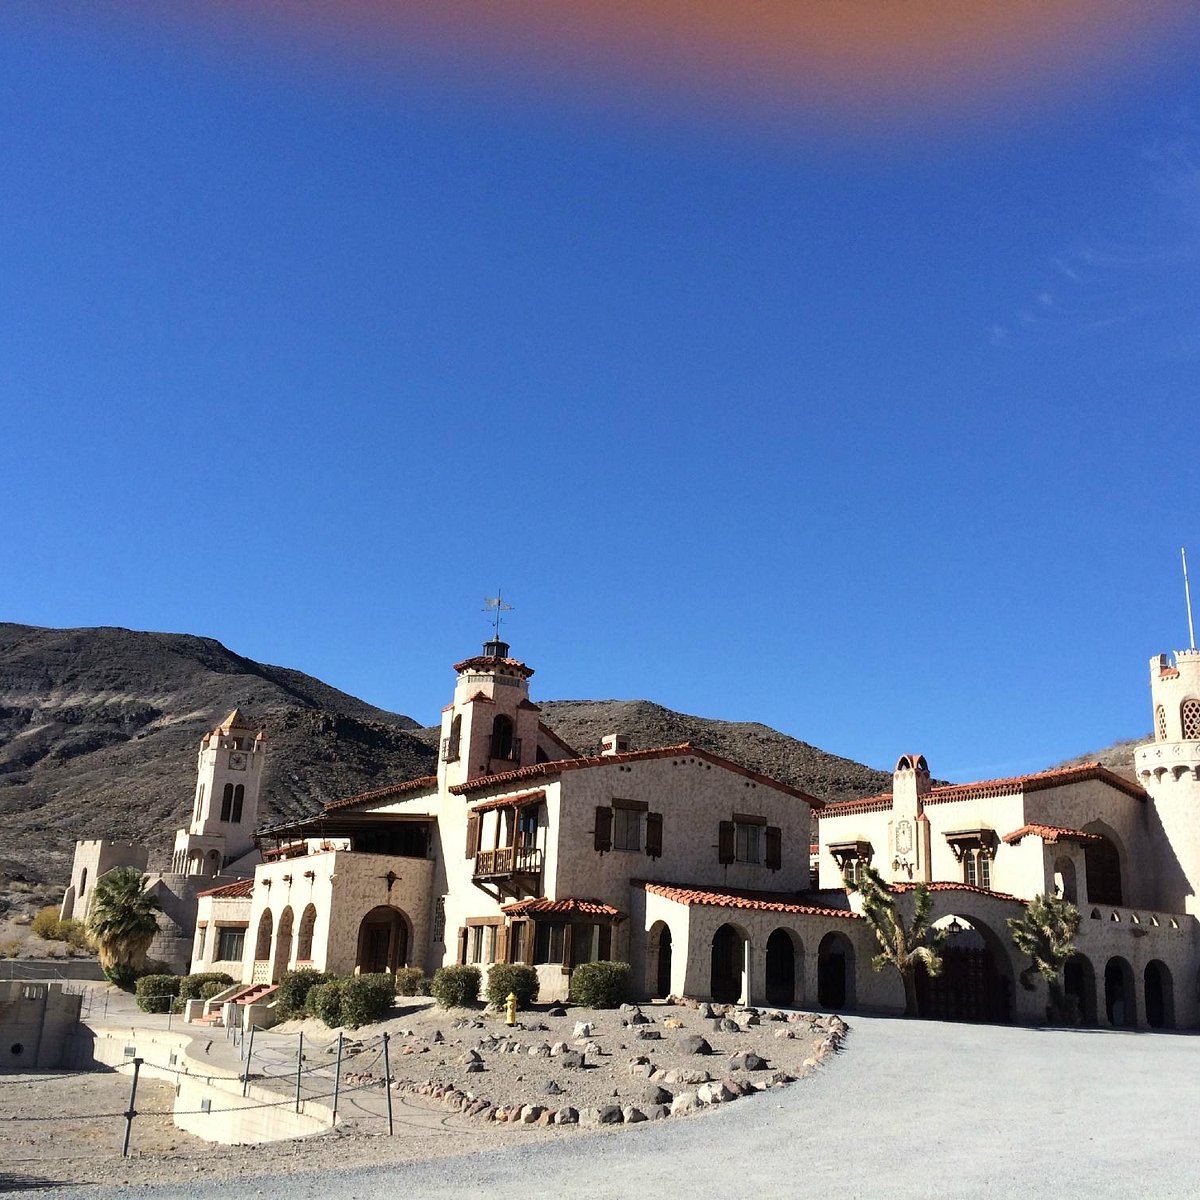 Scotty's Castle (Death Valley National Park) All You Need to Know